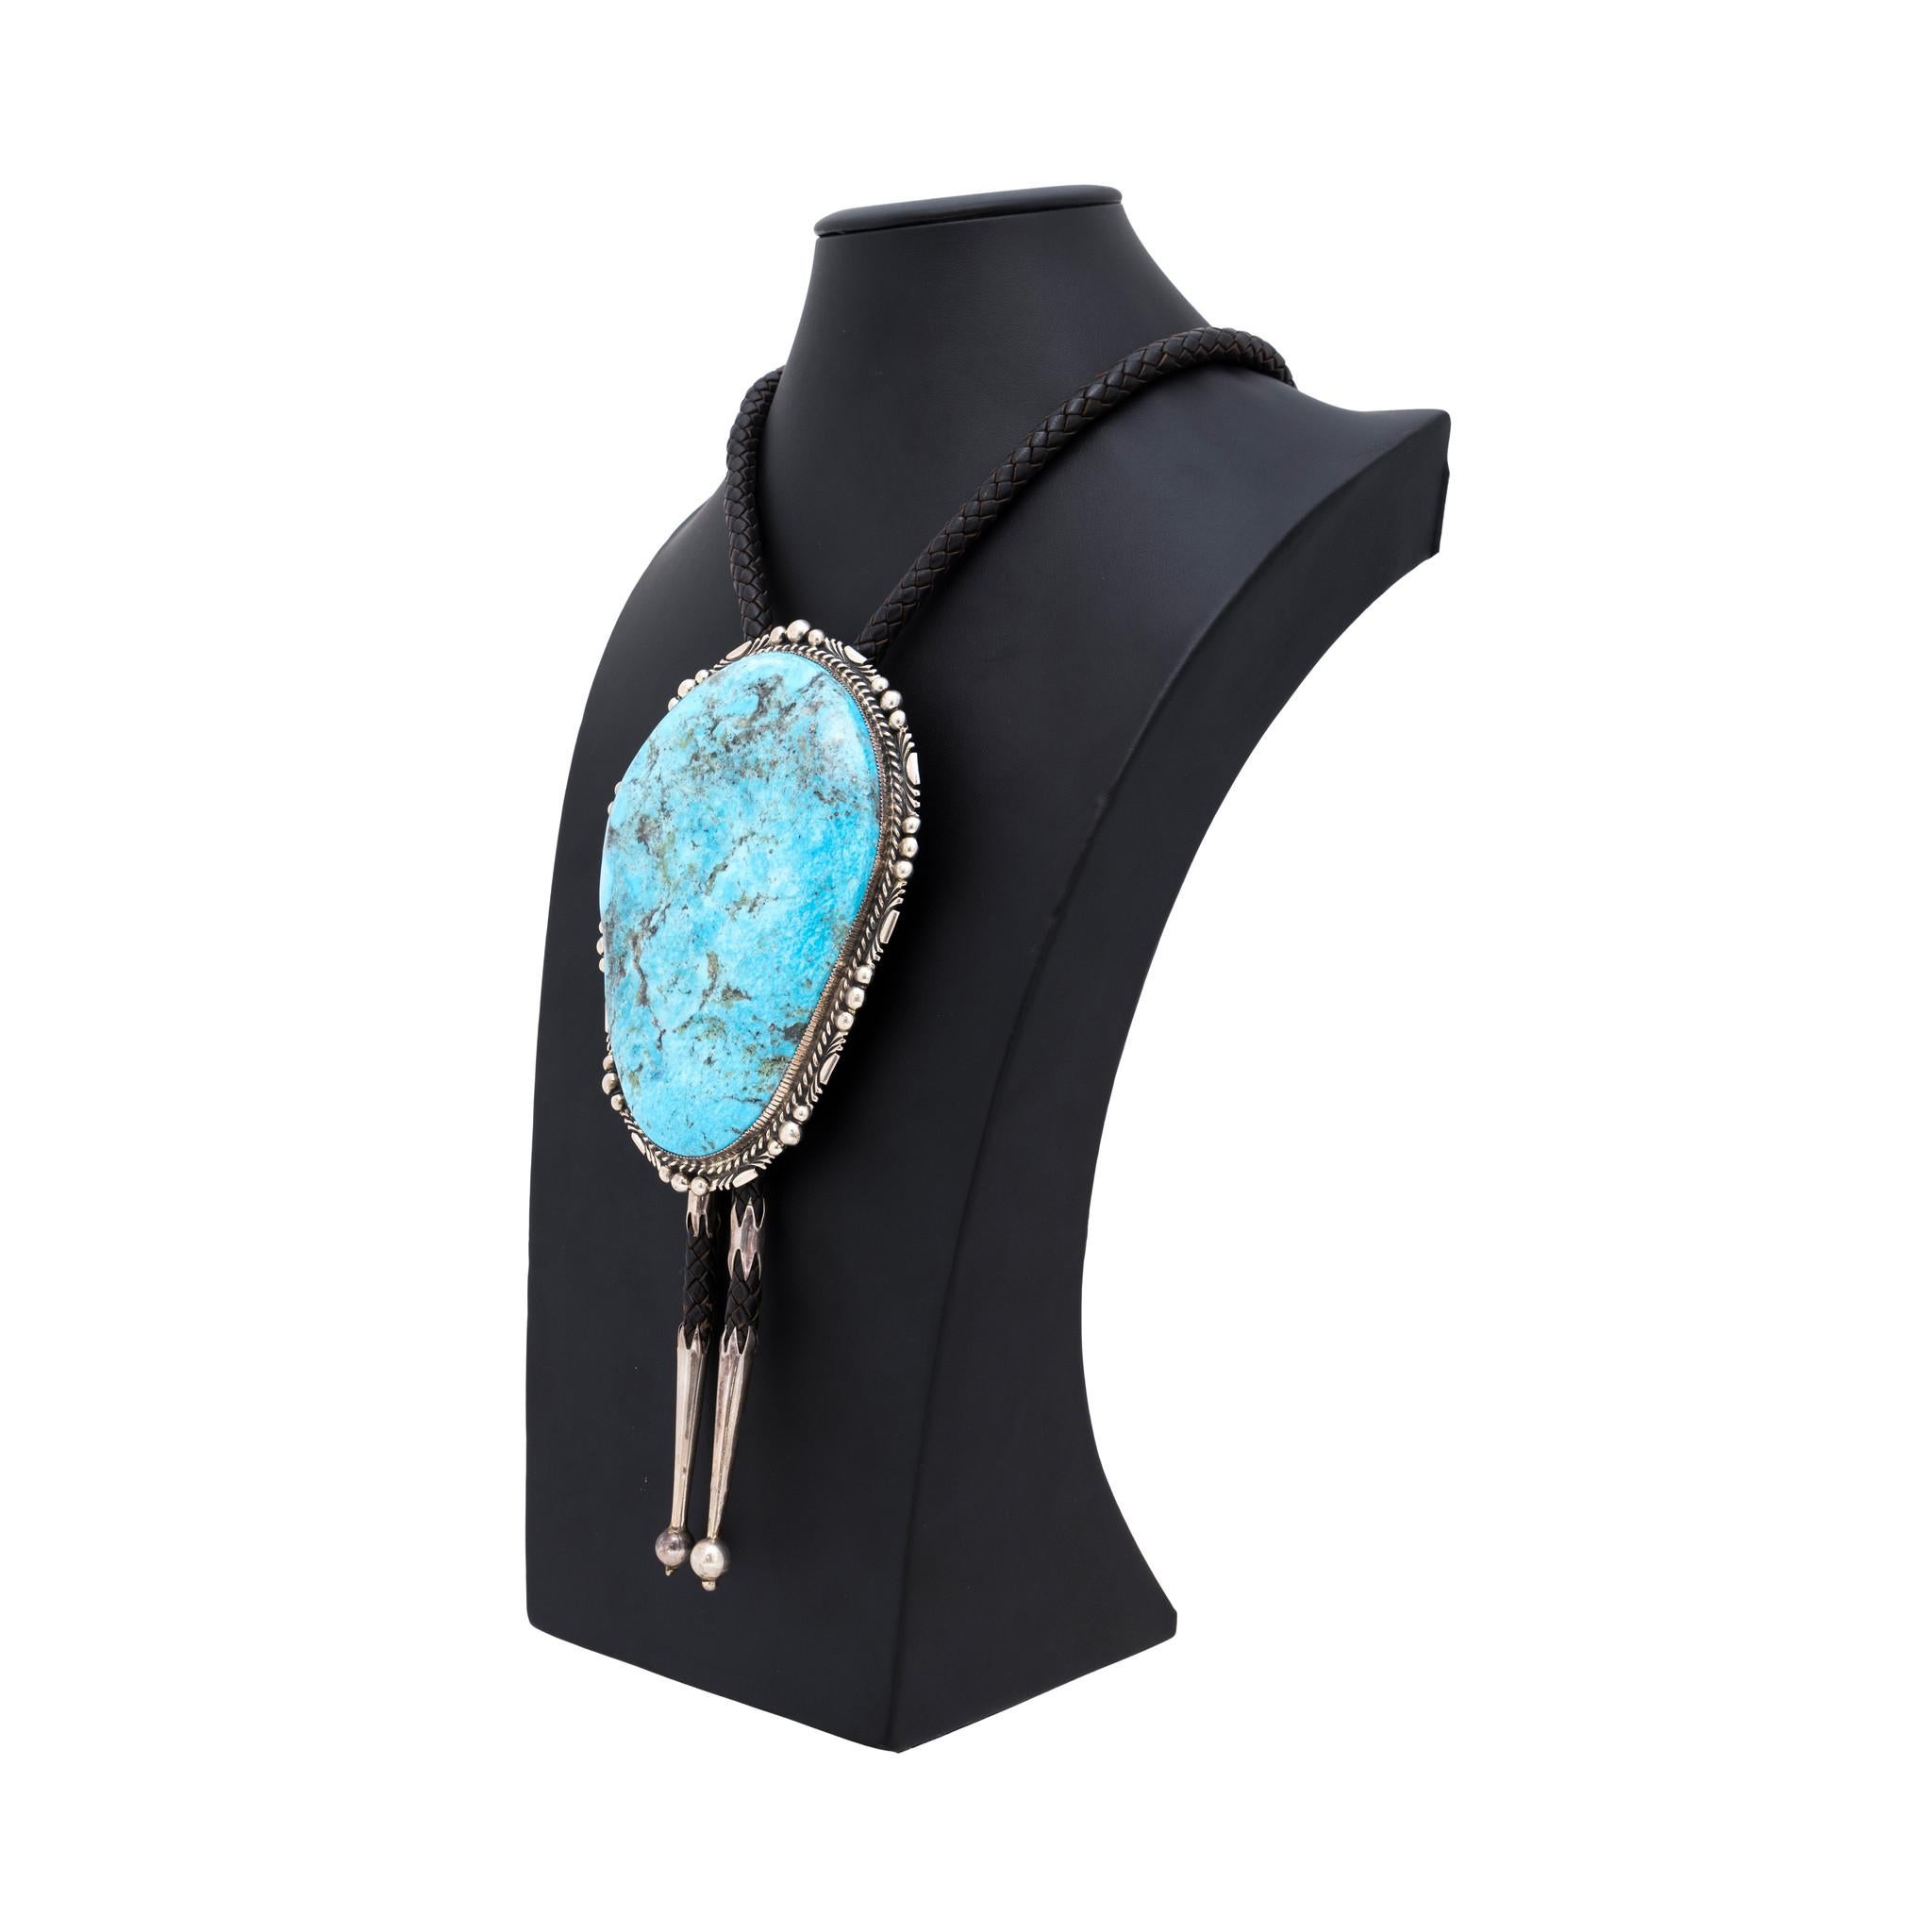 Exceptionally large Native American Navajo Indian Kingman turquoise and sterling silver bolo by Avin Joe. This piece is a show stopper! 1 inch thick, 6 inches long, 4 inches wide and a whopping 980 carat stone. Premium grade A natural, untreated